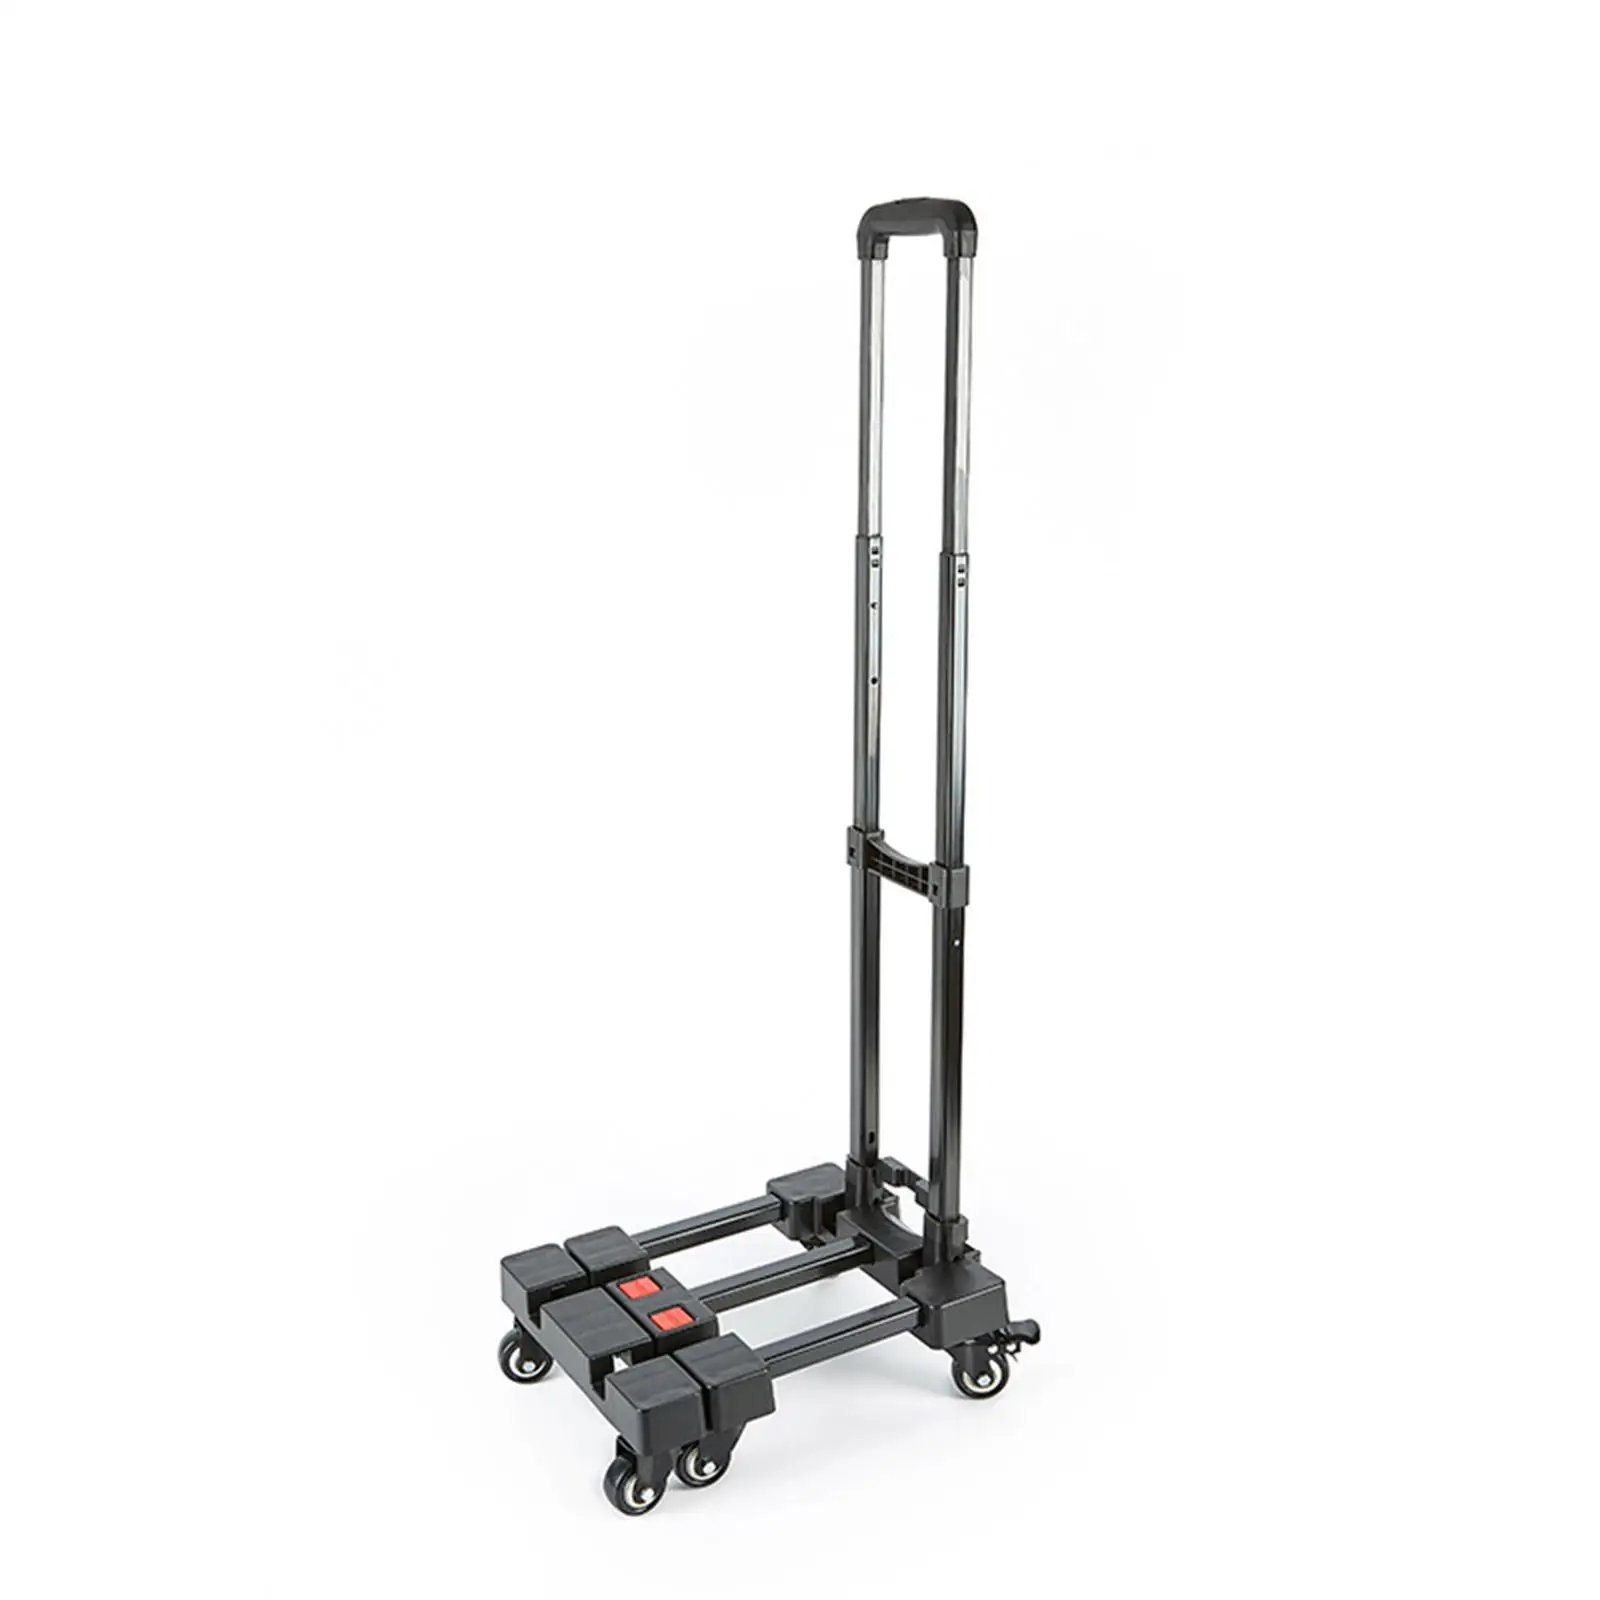 Folding Hand Truck Strong Telescoping Handle Stair Climbing Truck for Moving Outdoor 100kg (220lb) Load Capacity